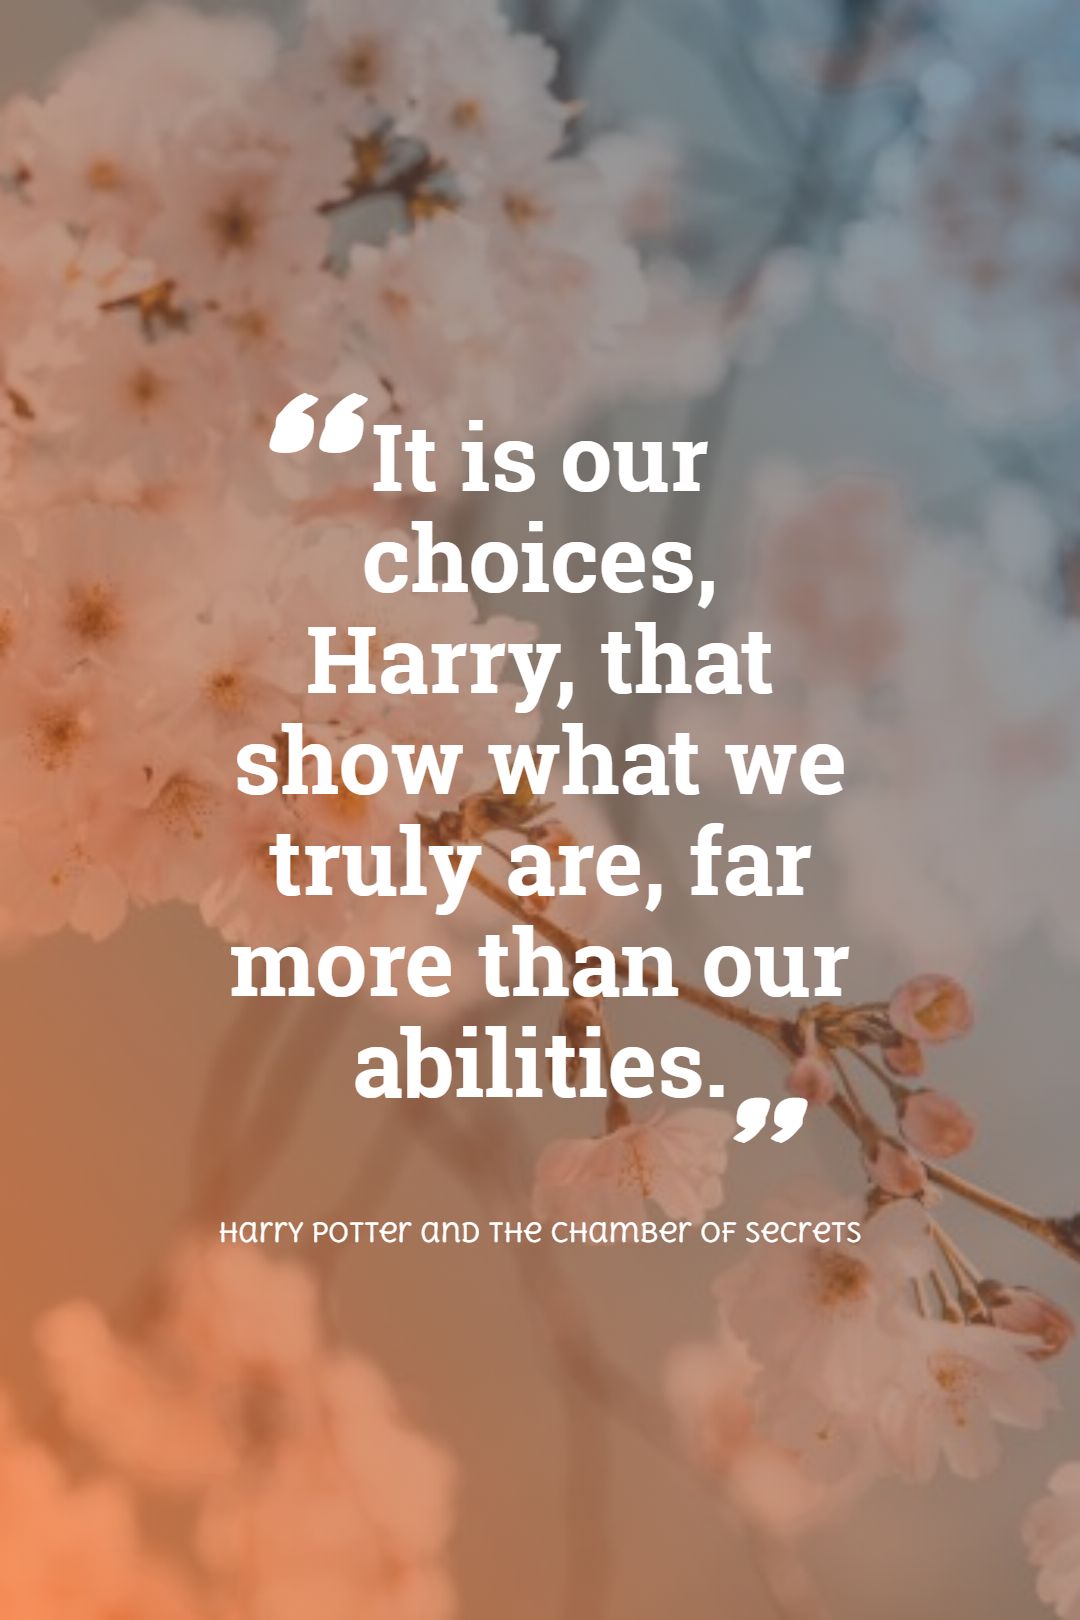 Inspiring Harry Potter Quotes